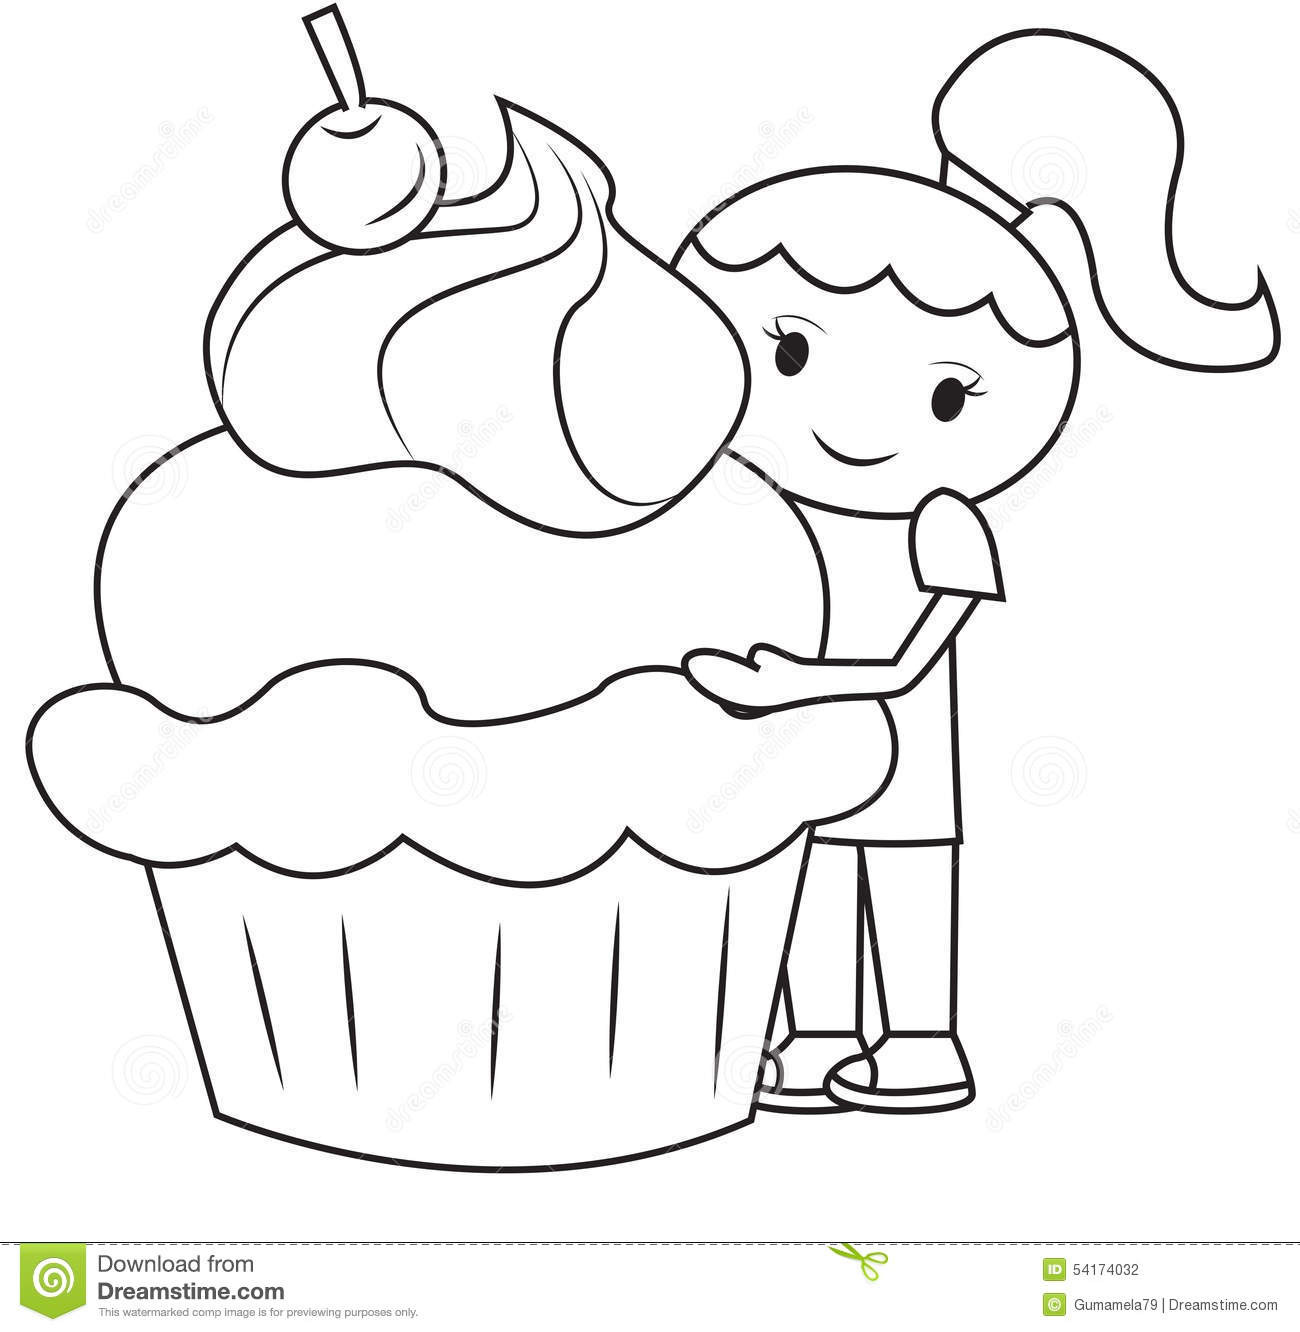 Large Coloring Books For Toddlers
 The Girl And The Big Cupcake Coloring Page Stock